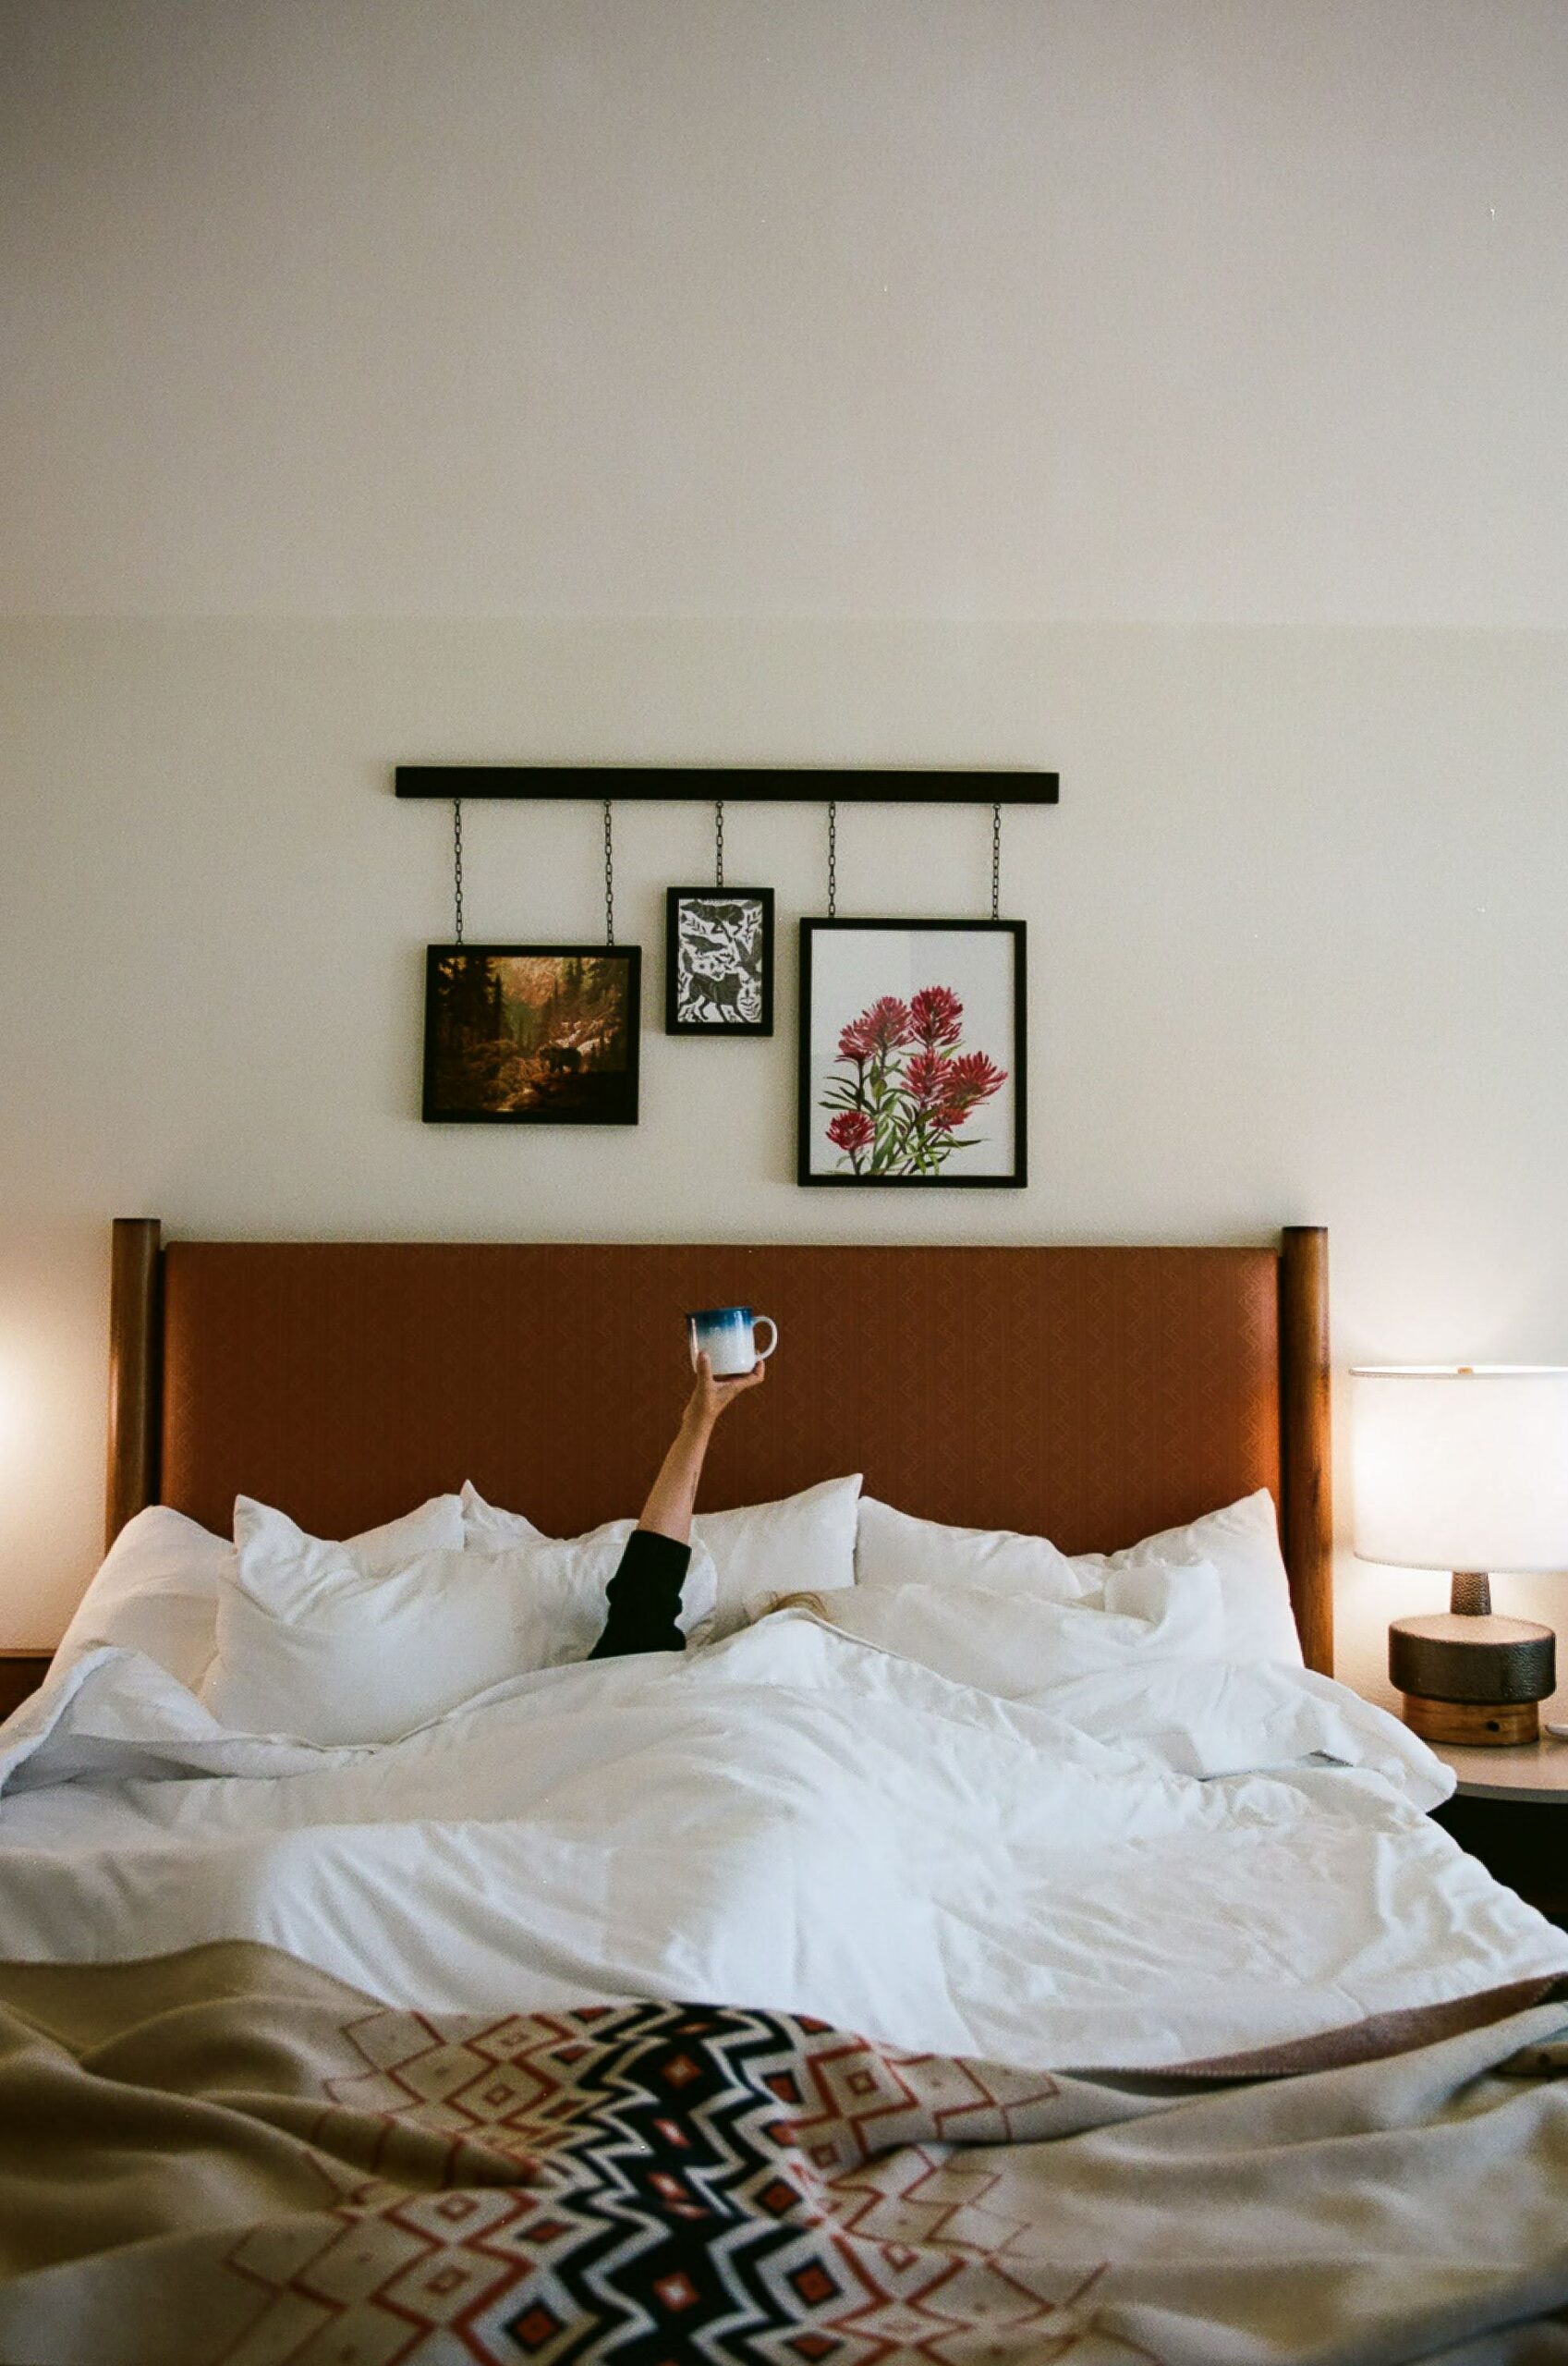 In bed, a guy raises a hand holding a coffee cup, with portraits mounted nearby.